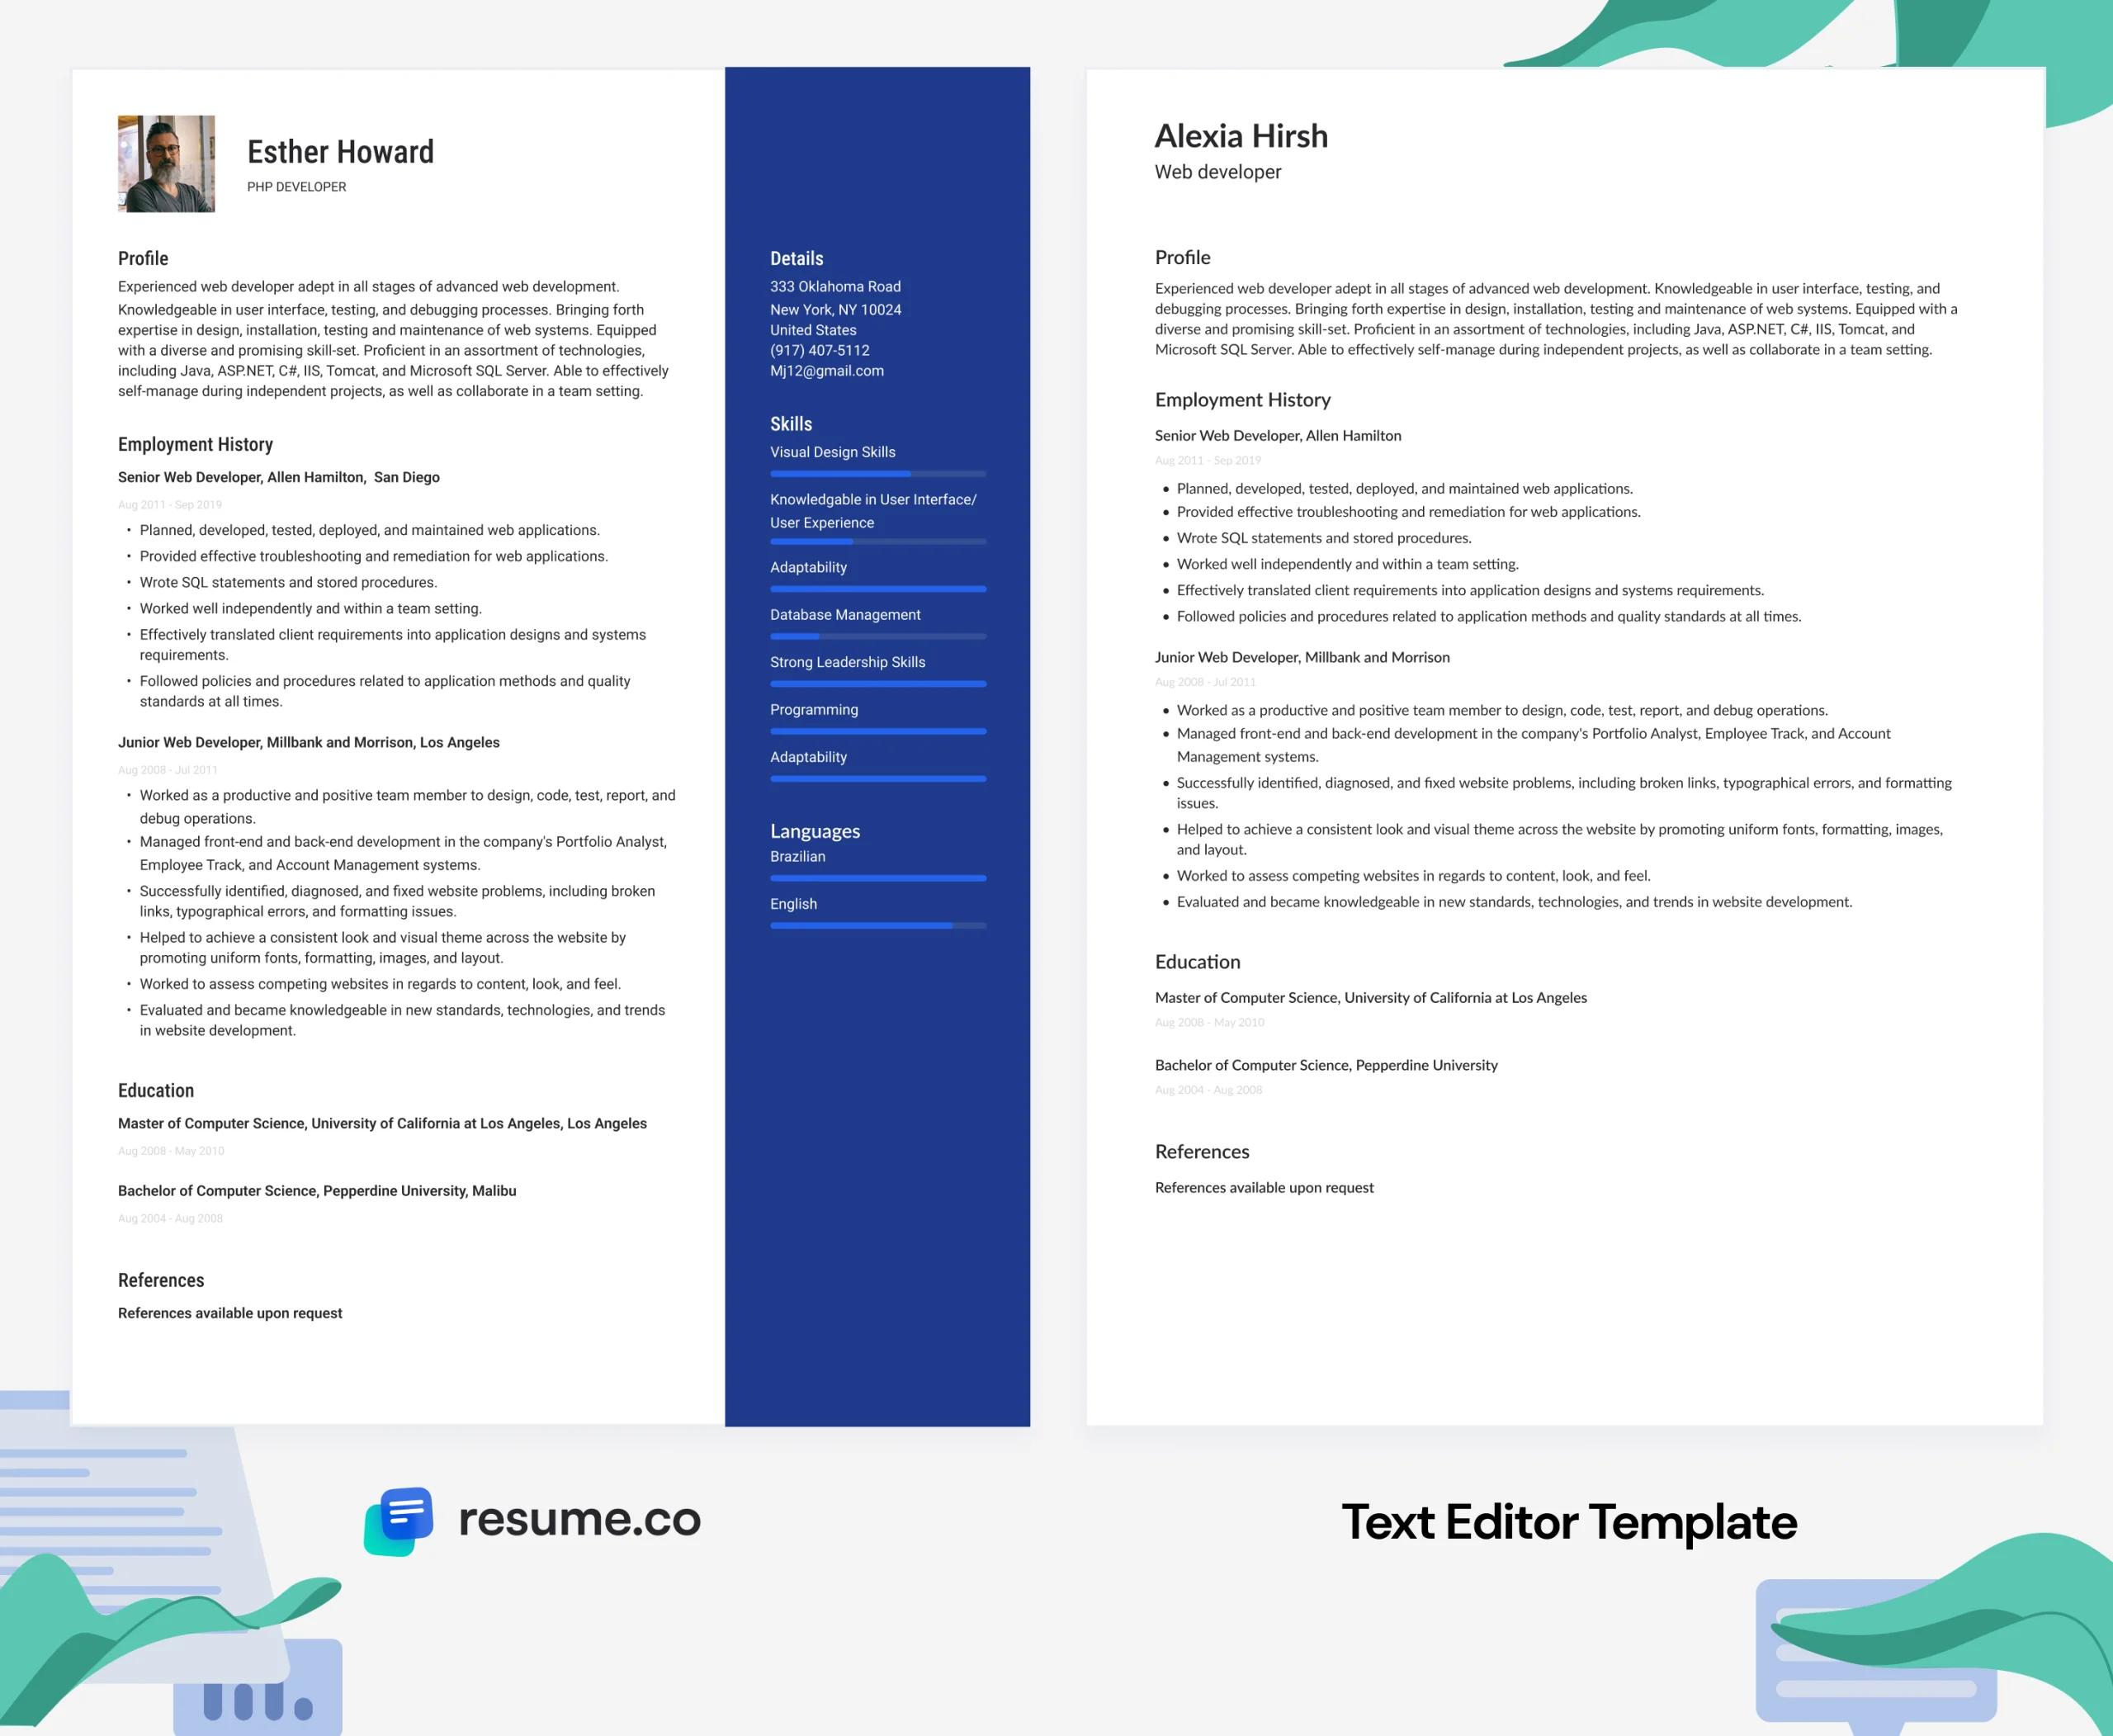 A resume from resume.co vs a text editor